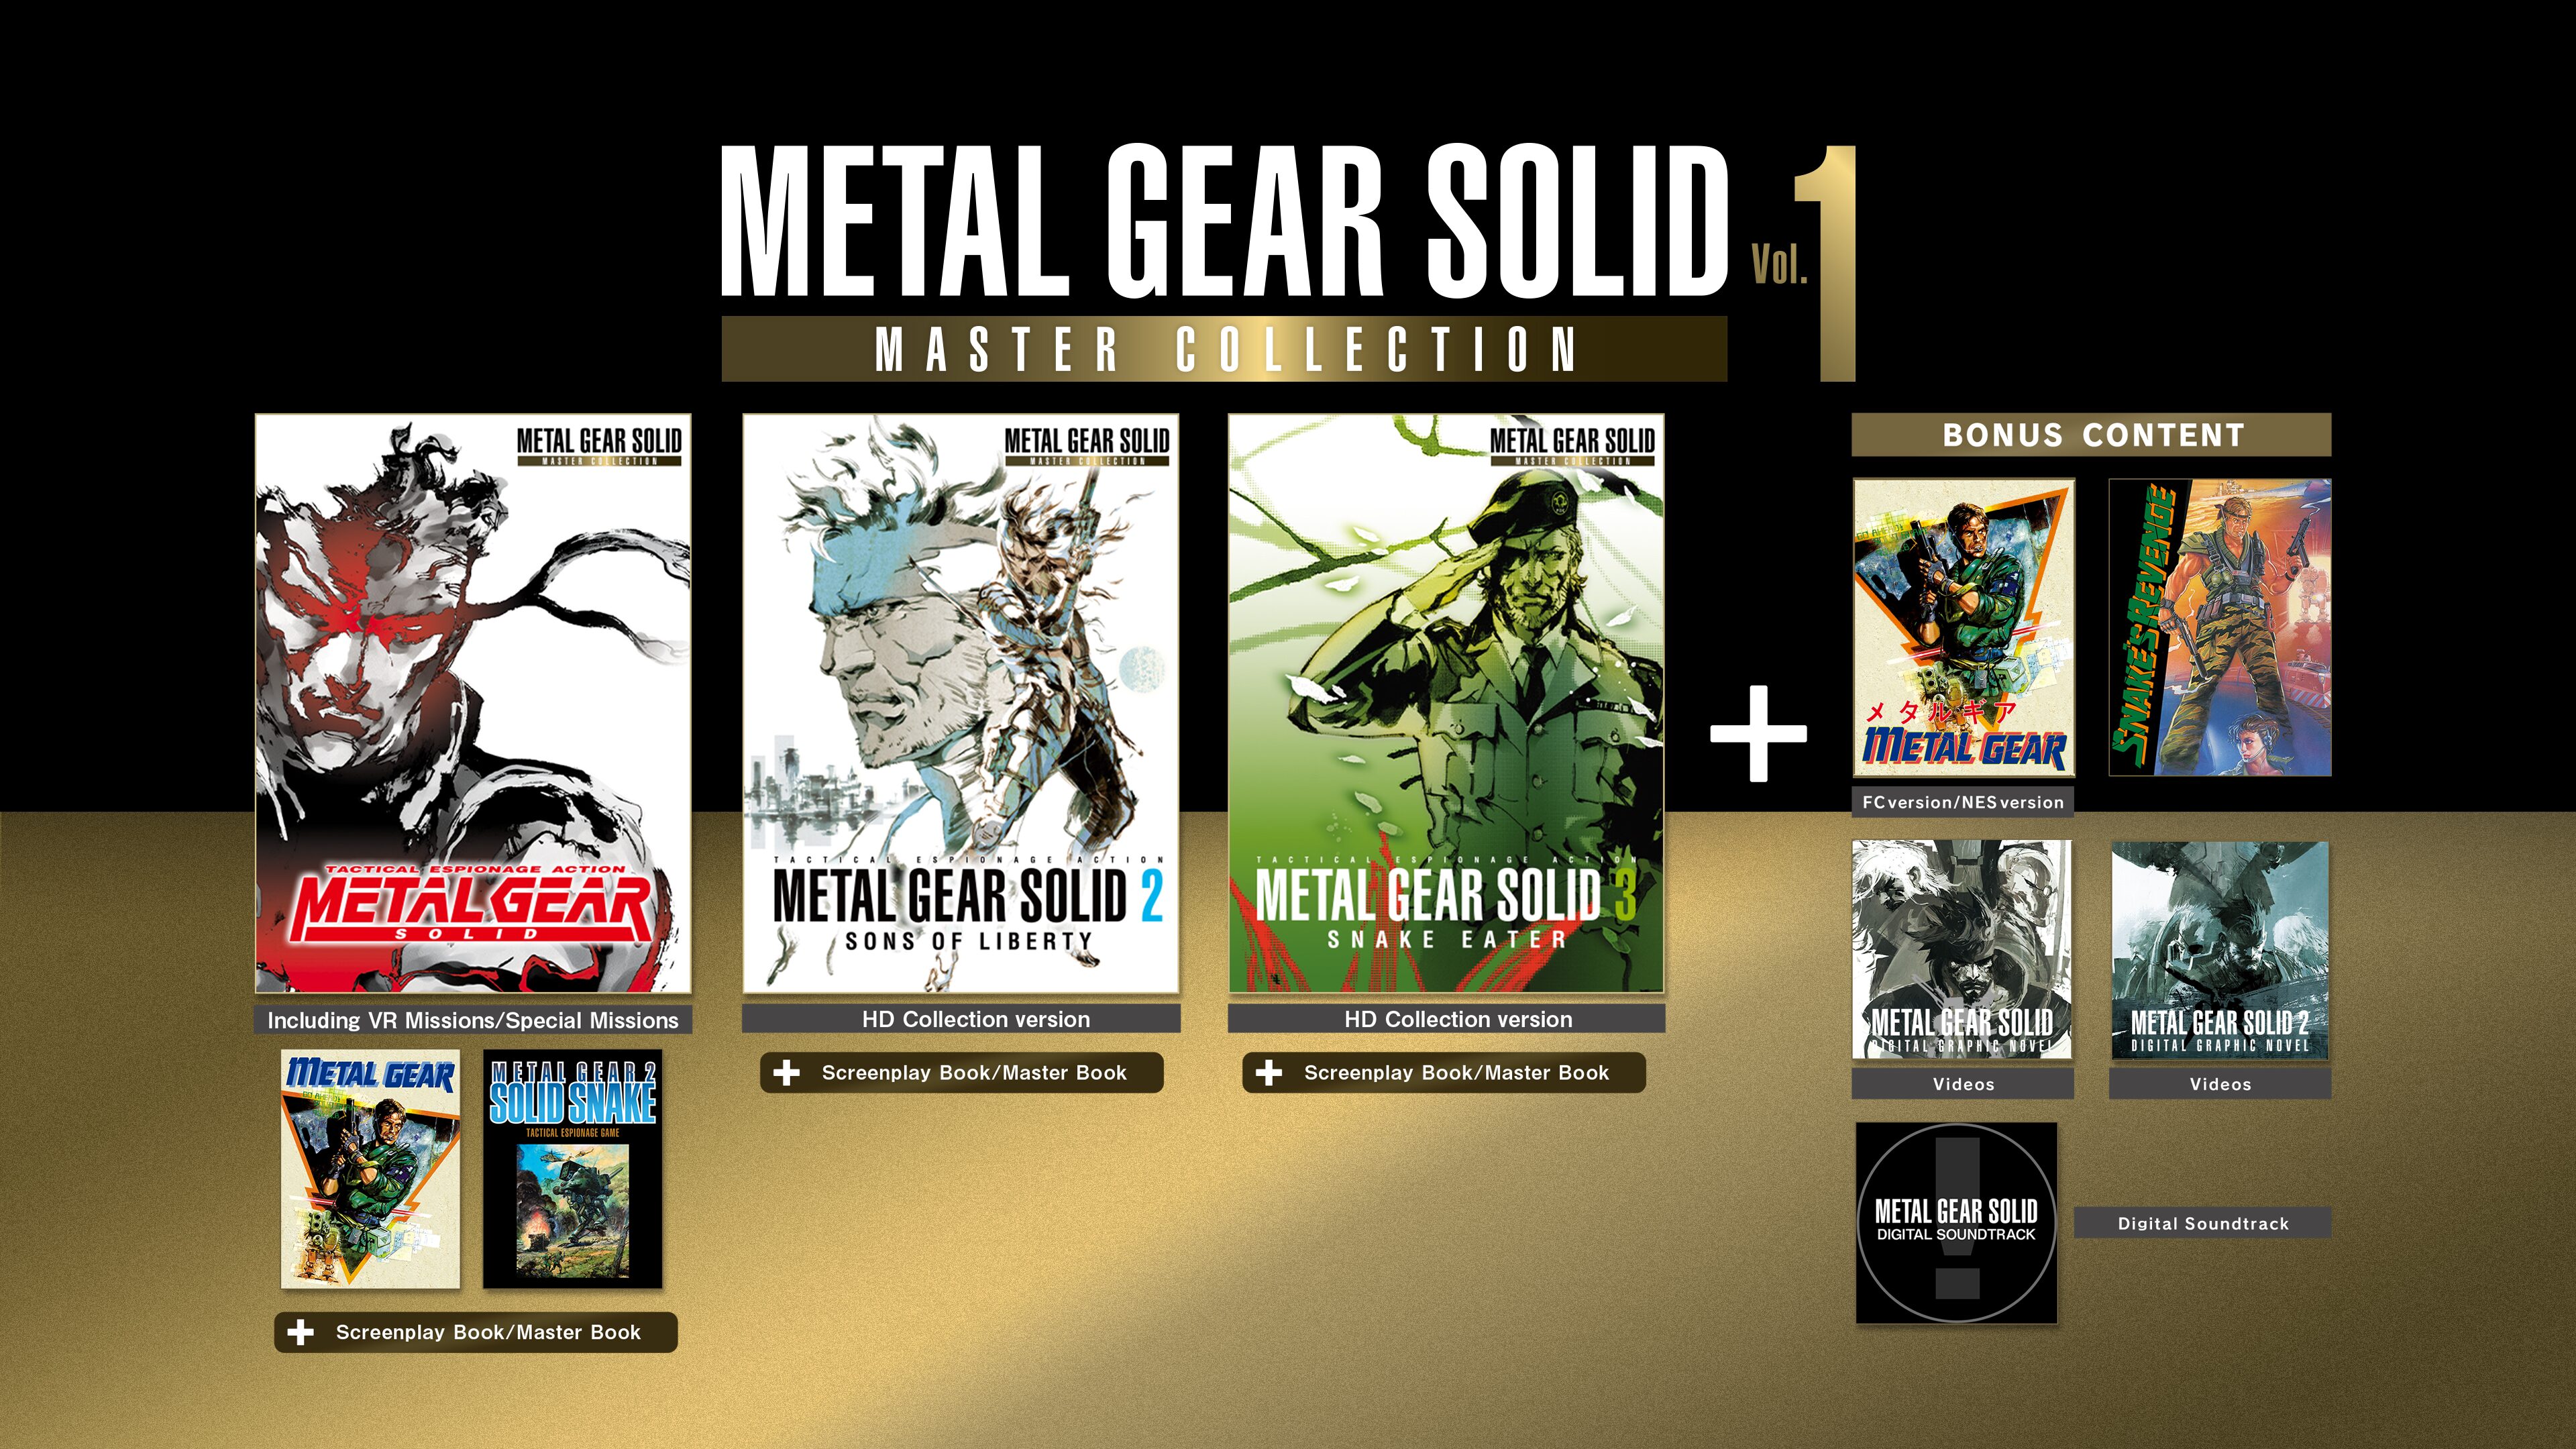 Mgs 3 master collection. Metal Gear Solid 3 обложка. Metal Gear Solid Master collection. Metal Gear Solid Master collection PS 4. Metal Gear Solid: Master collection Vol. 1.